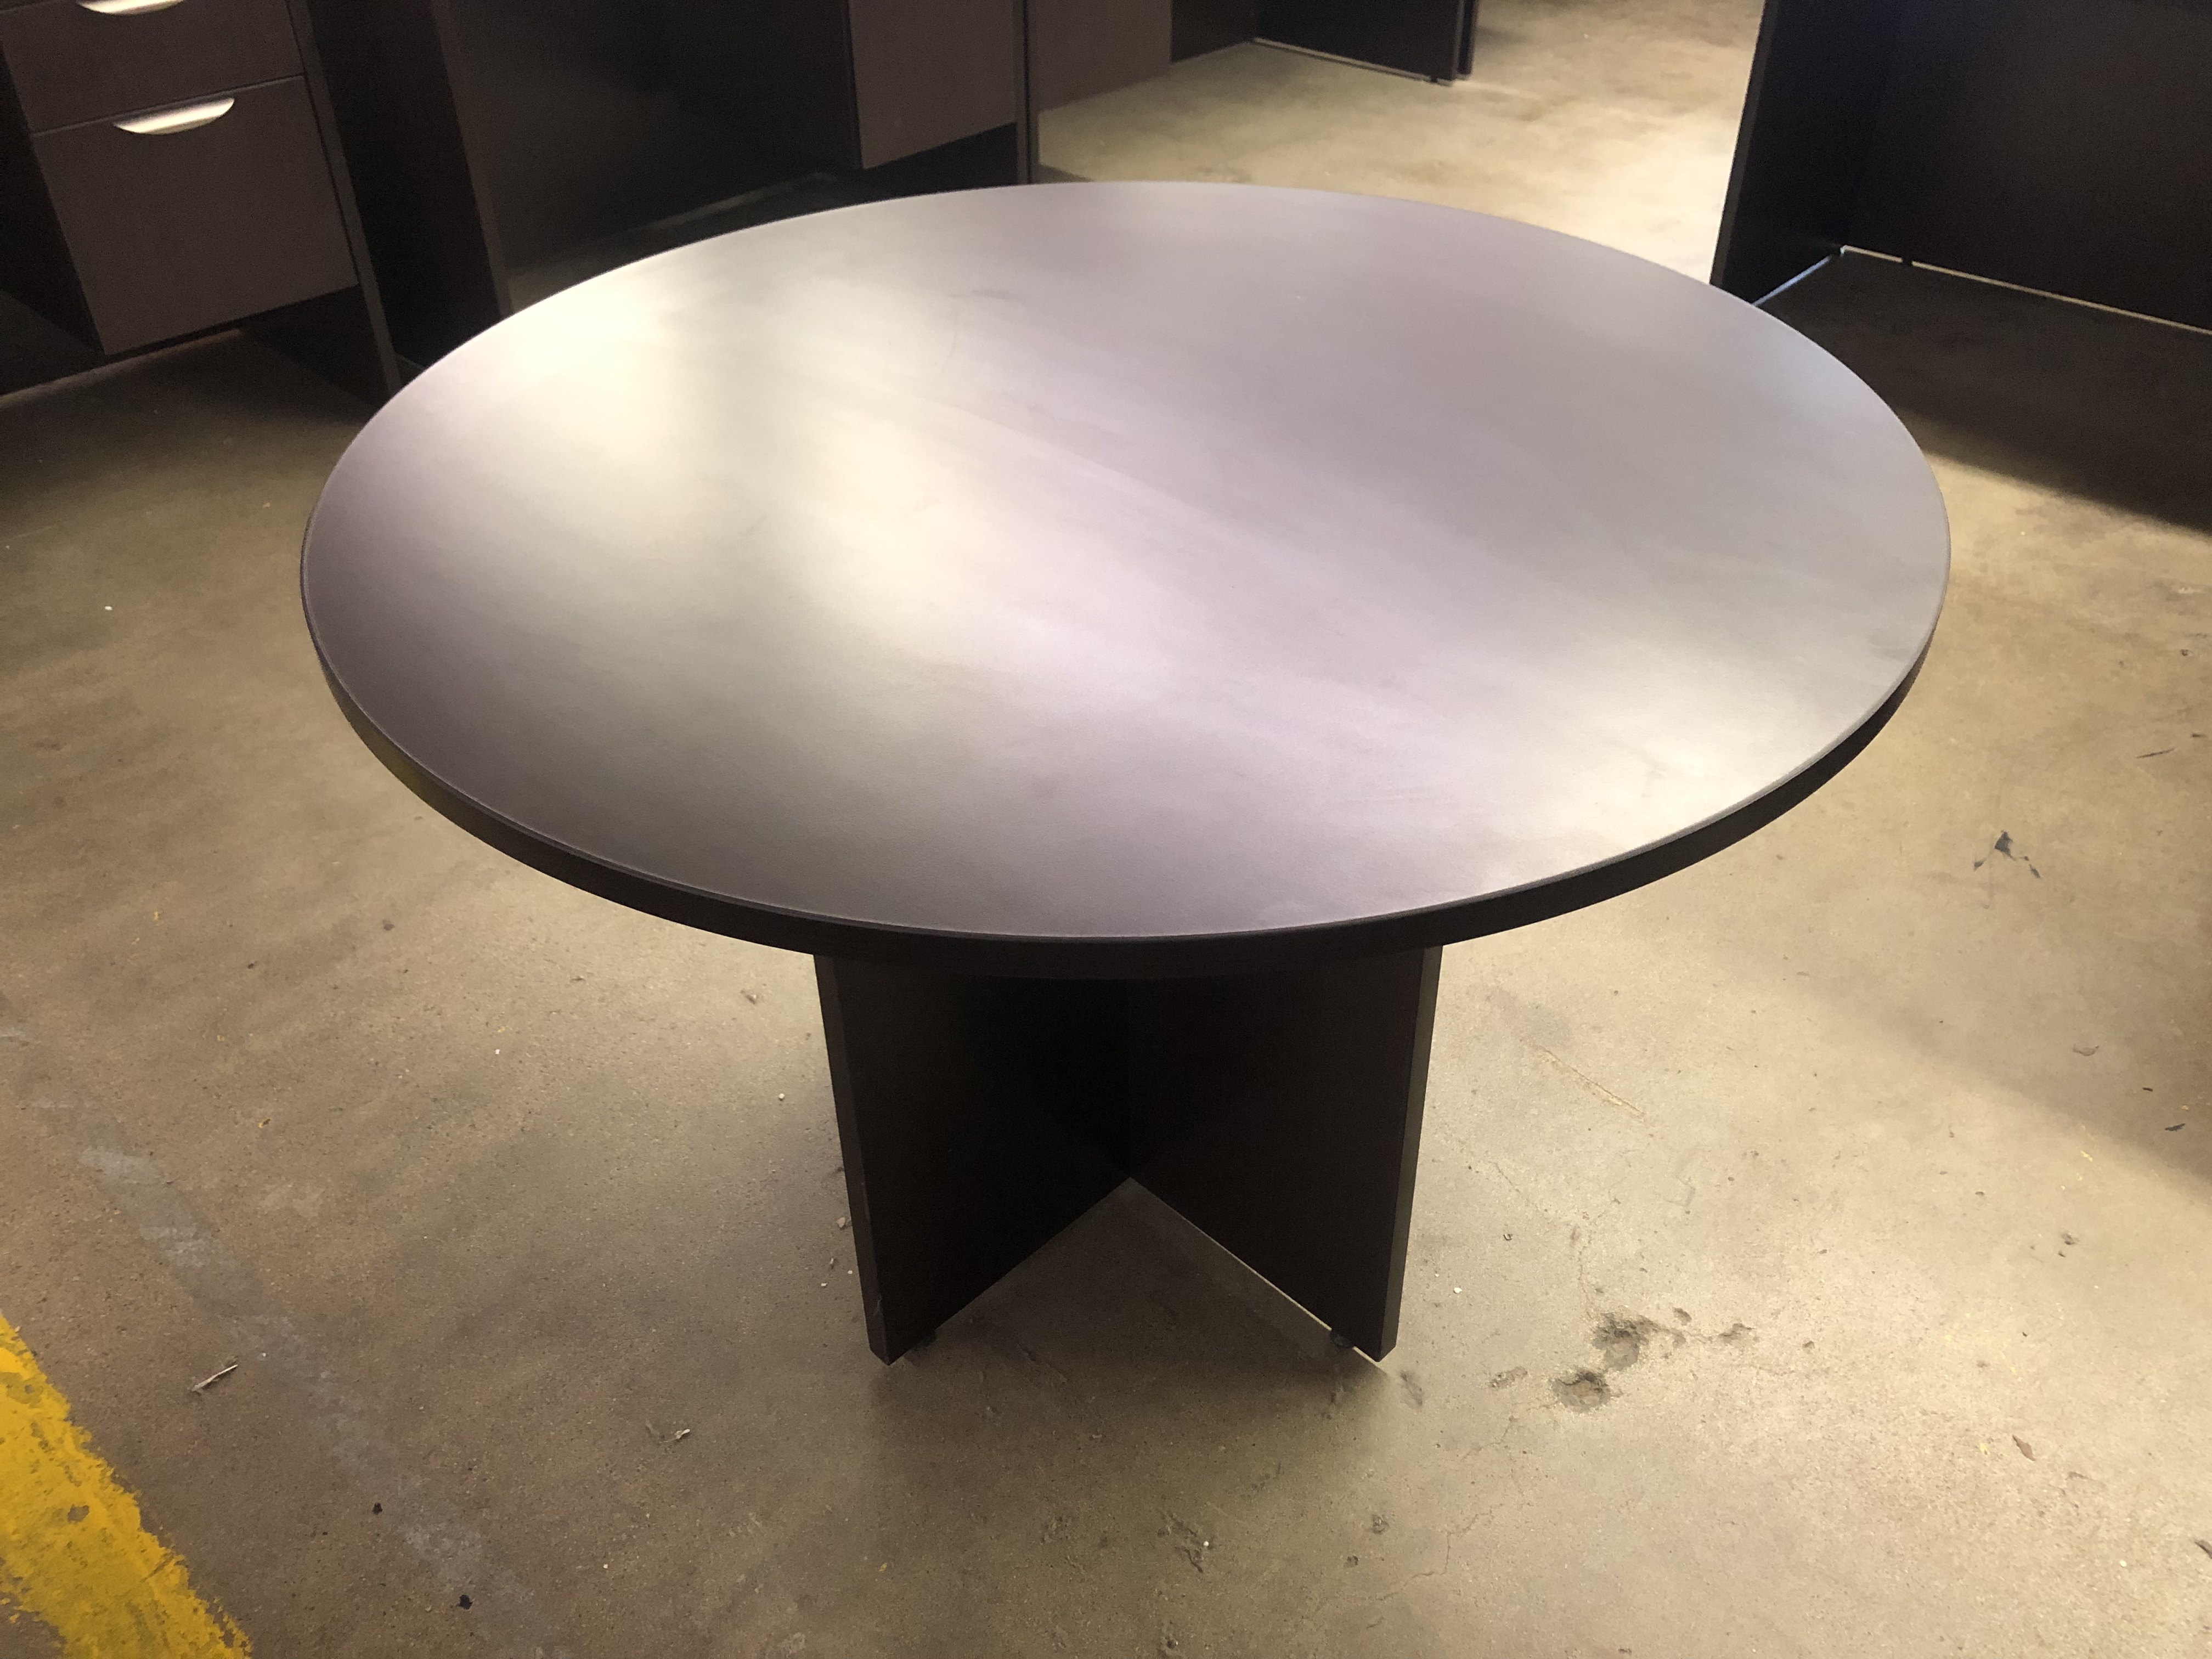 42 Round Conference Table | New-Used Office Furniture, office chairs ...